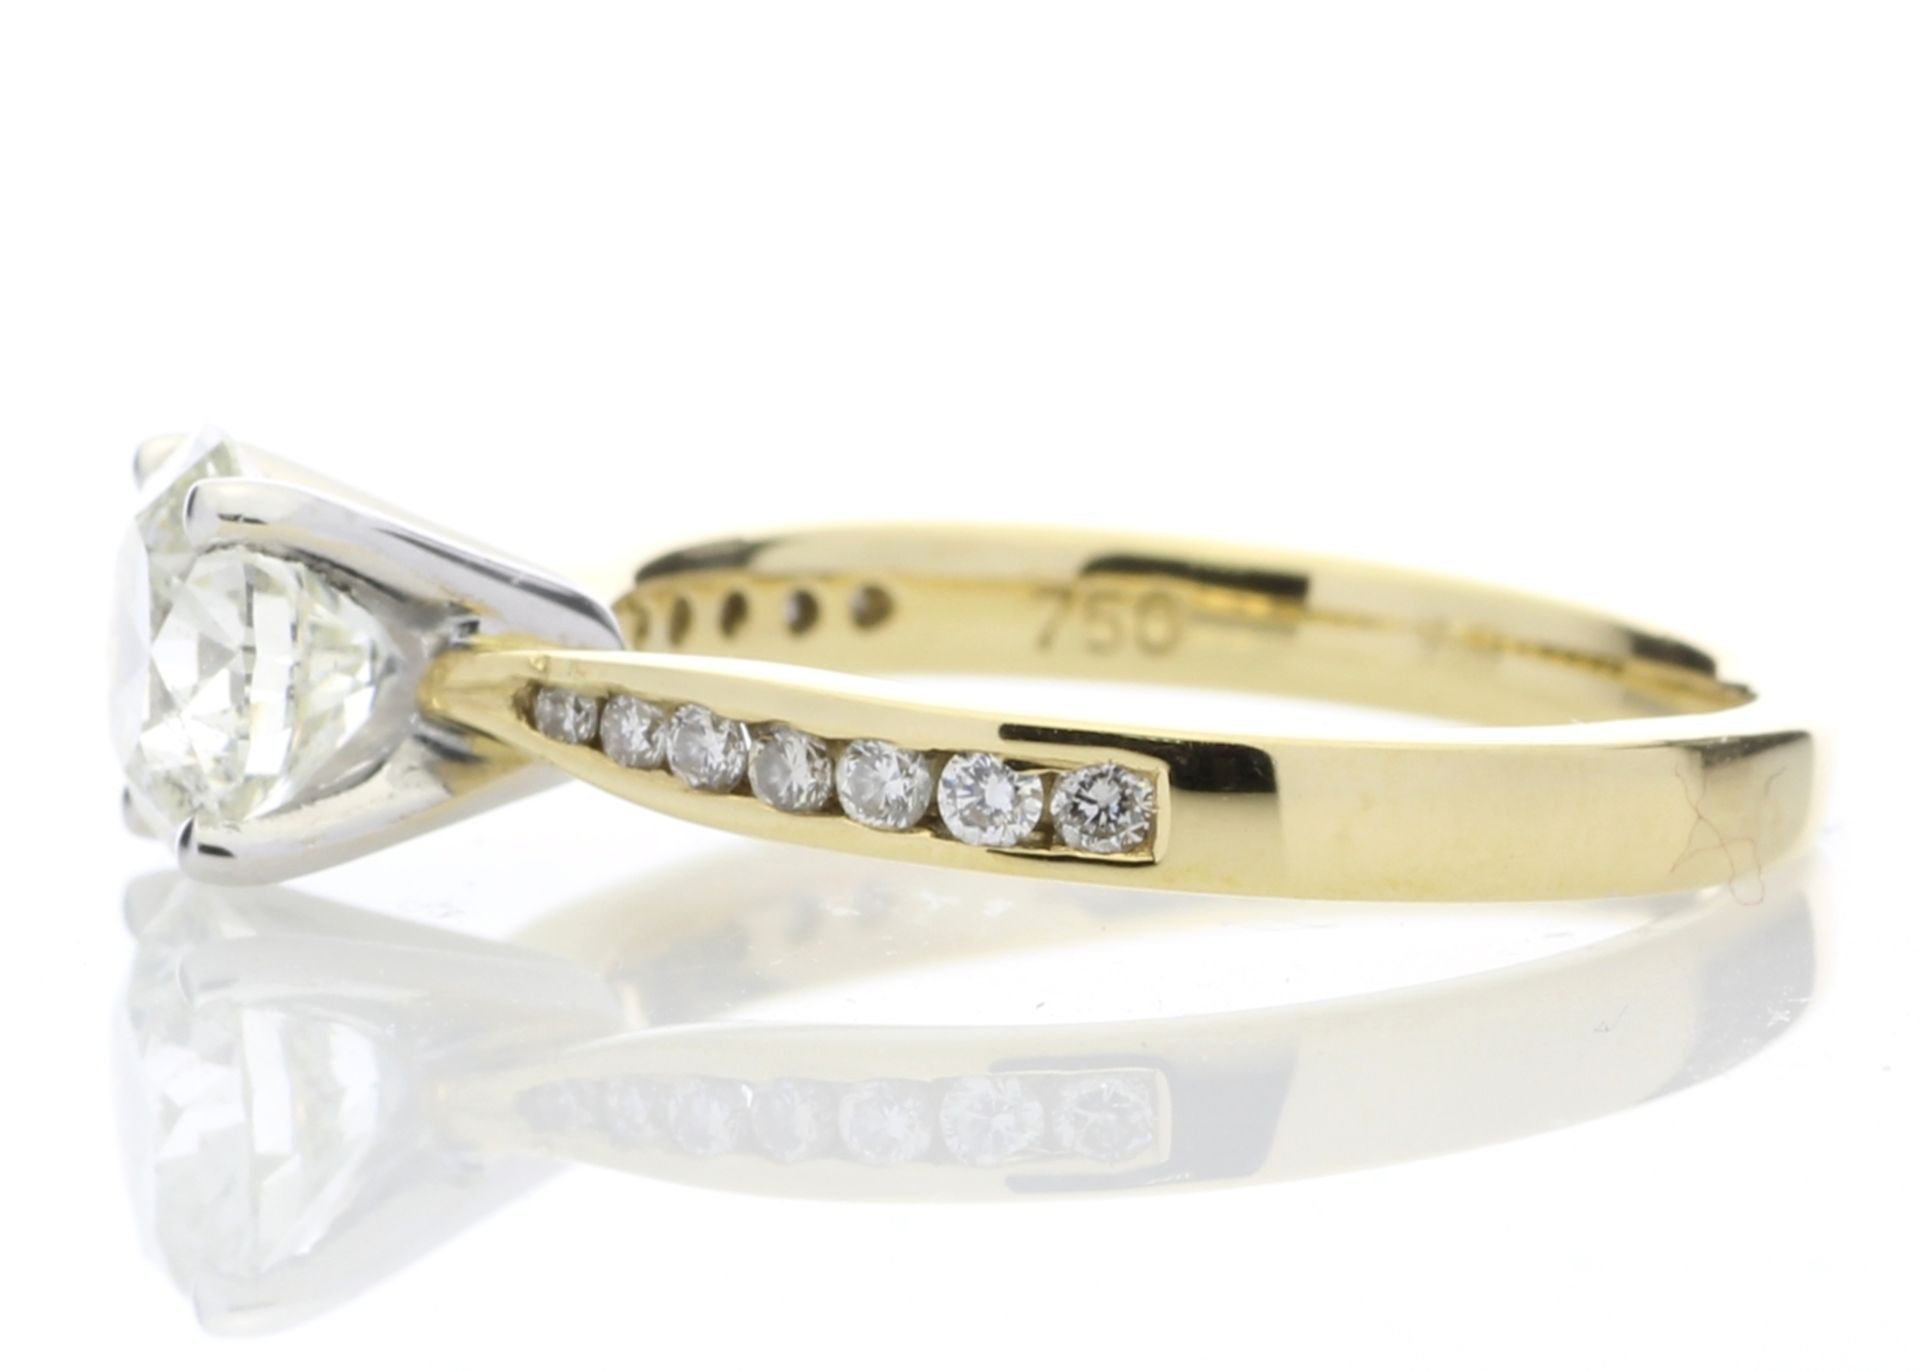 18ct Yellow Gold Diamond Ring With Stone Set Shoulders 1.28 Carats - Image 3 of 5